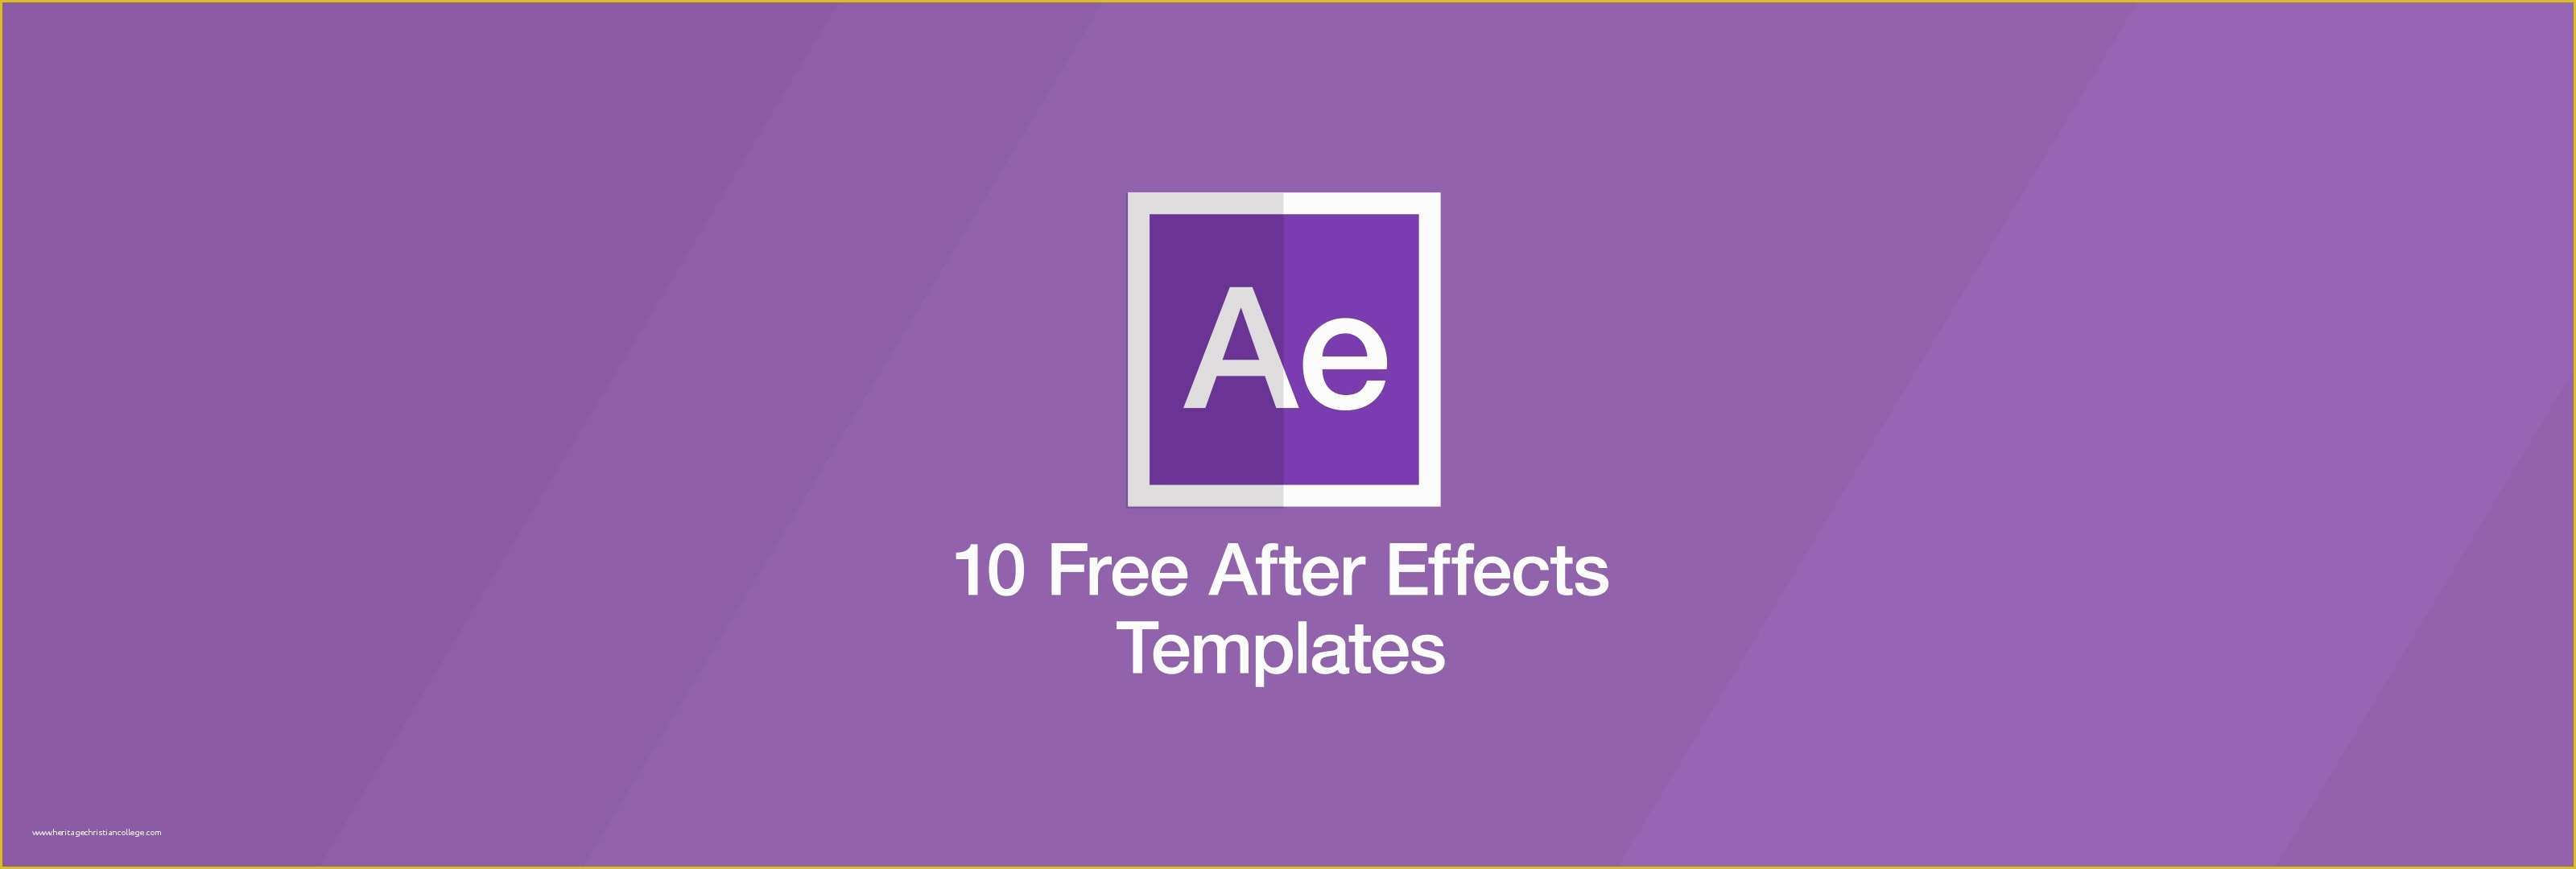 Free Ae Templates Of Free after Effects Templates